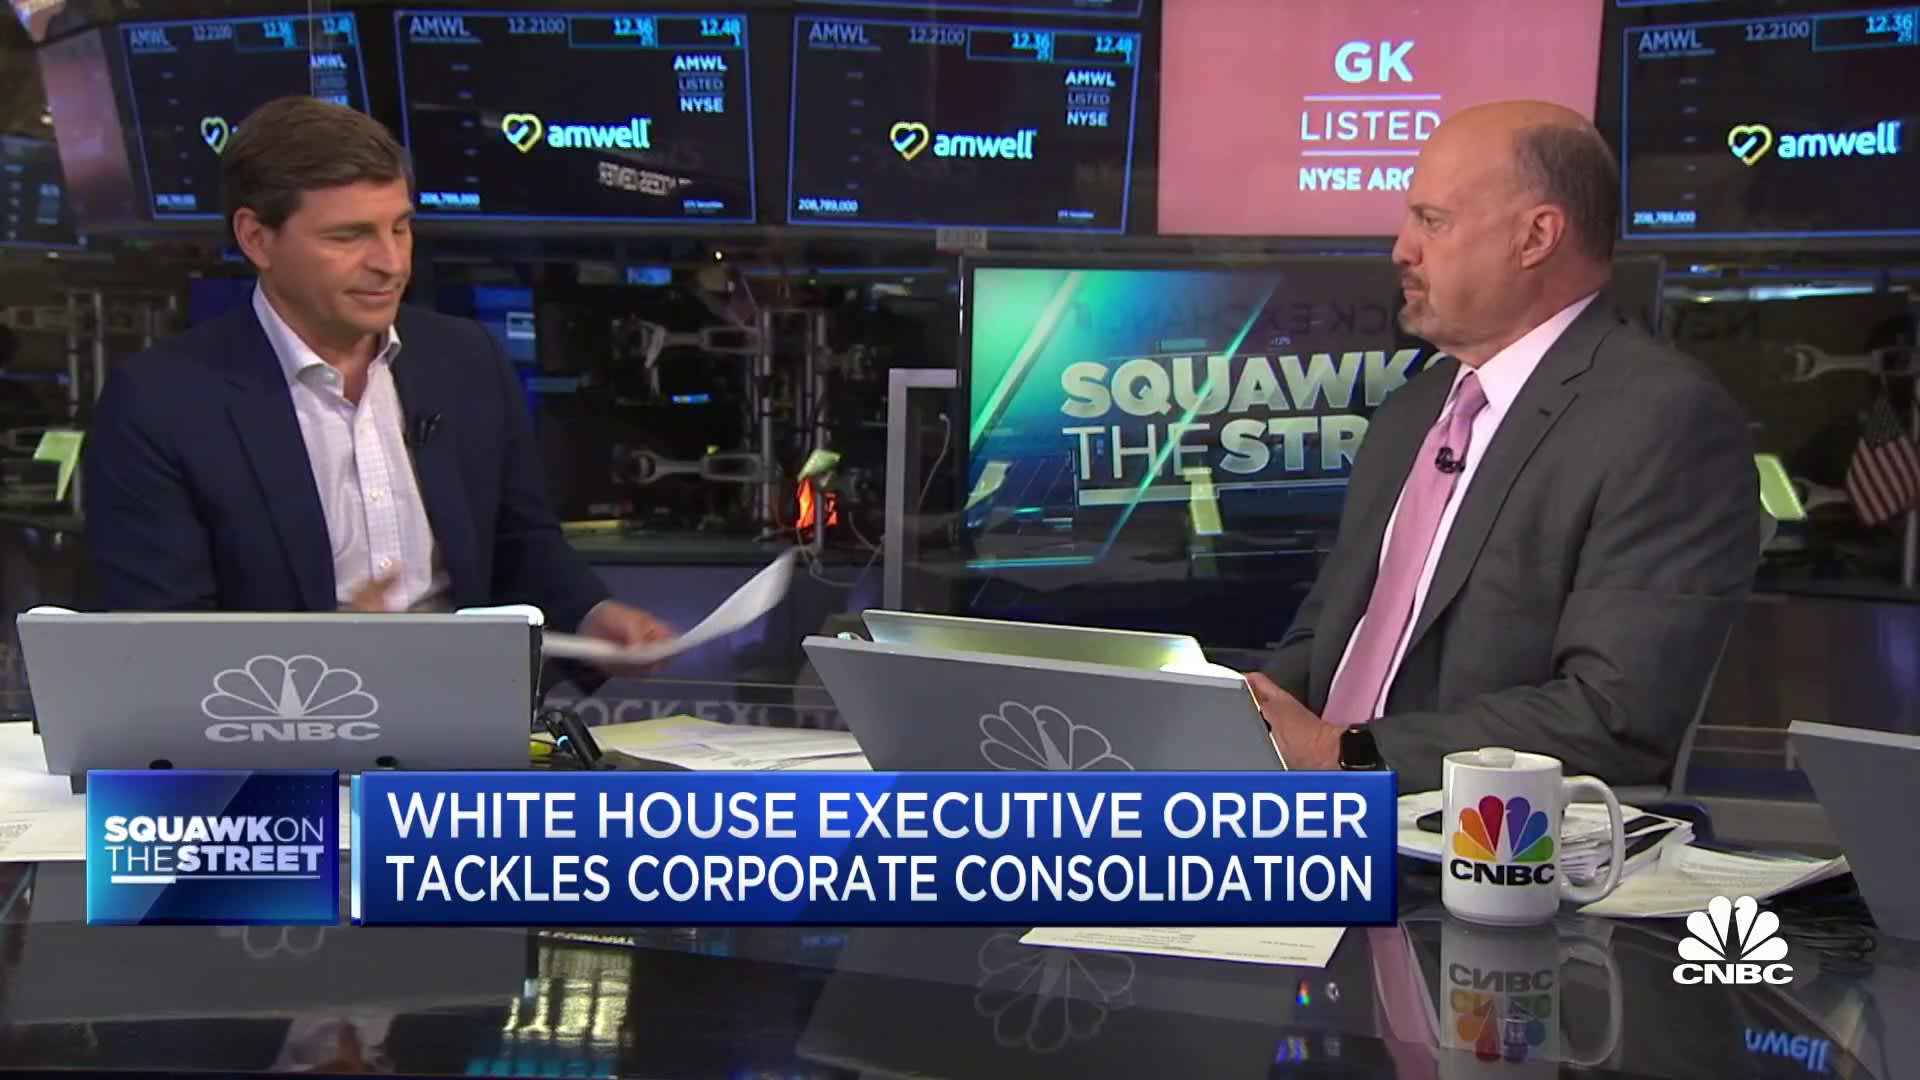 Cramer on White House executive order tackling corporate consolidation